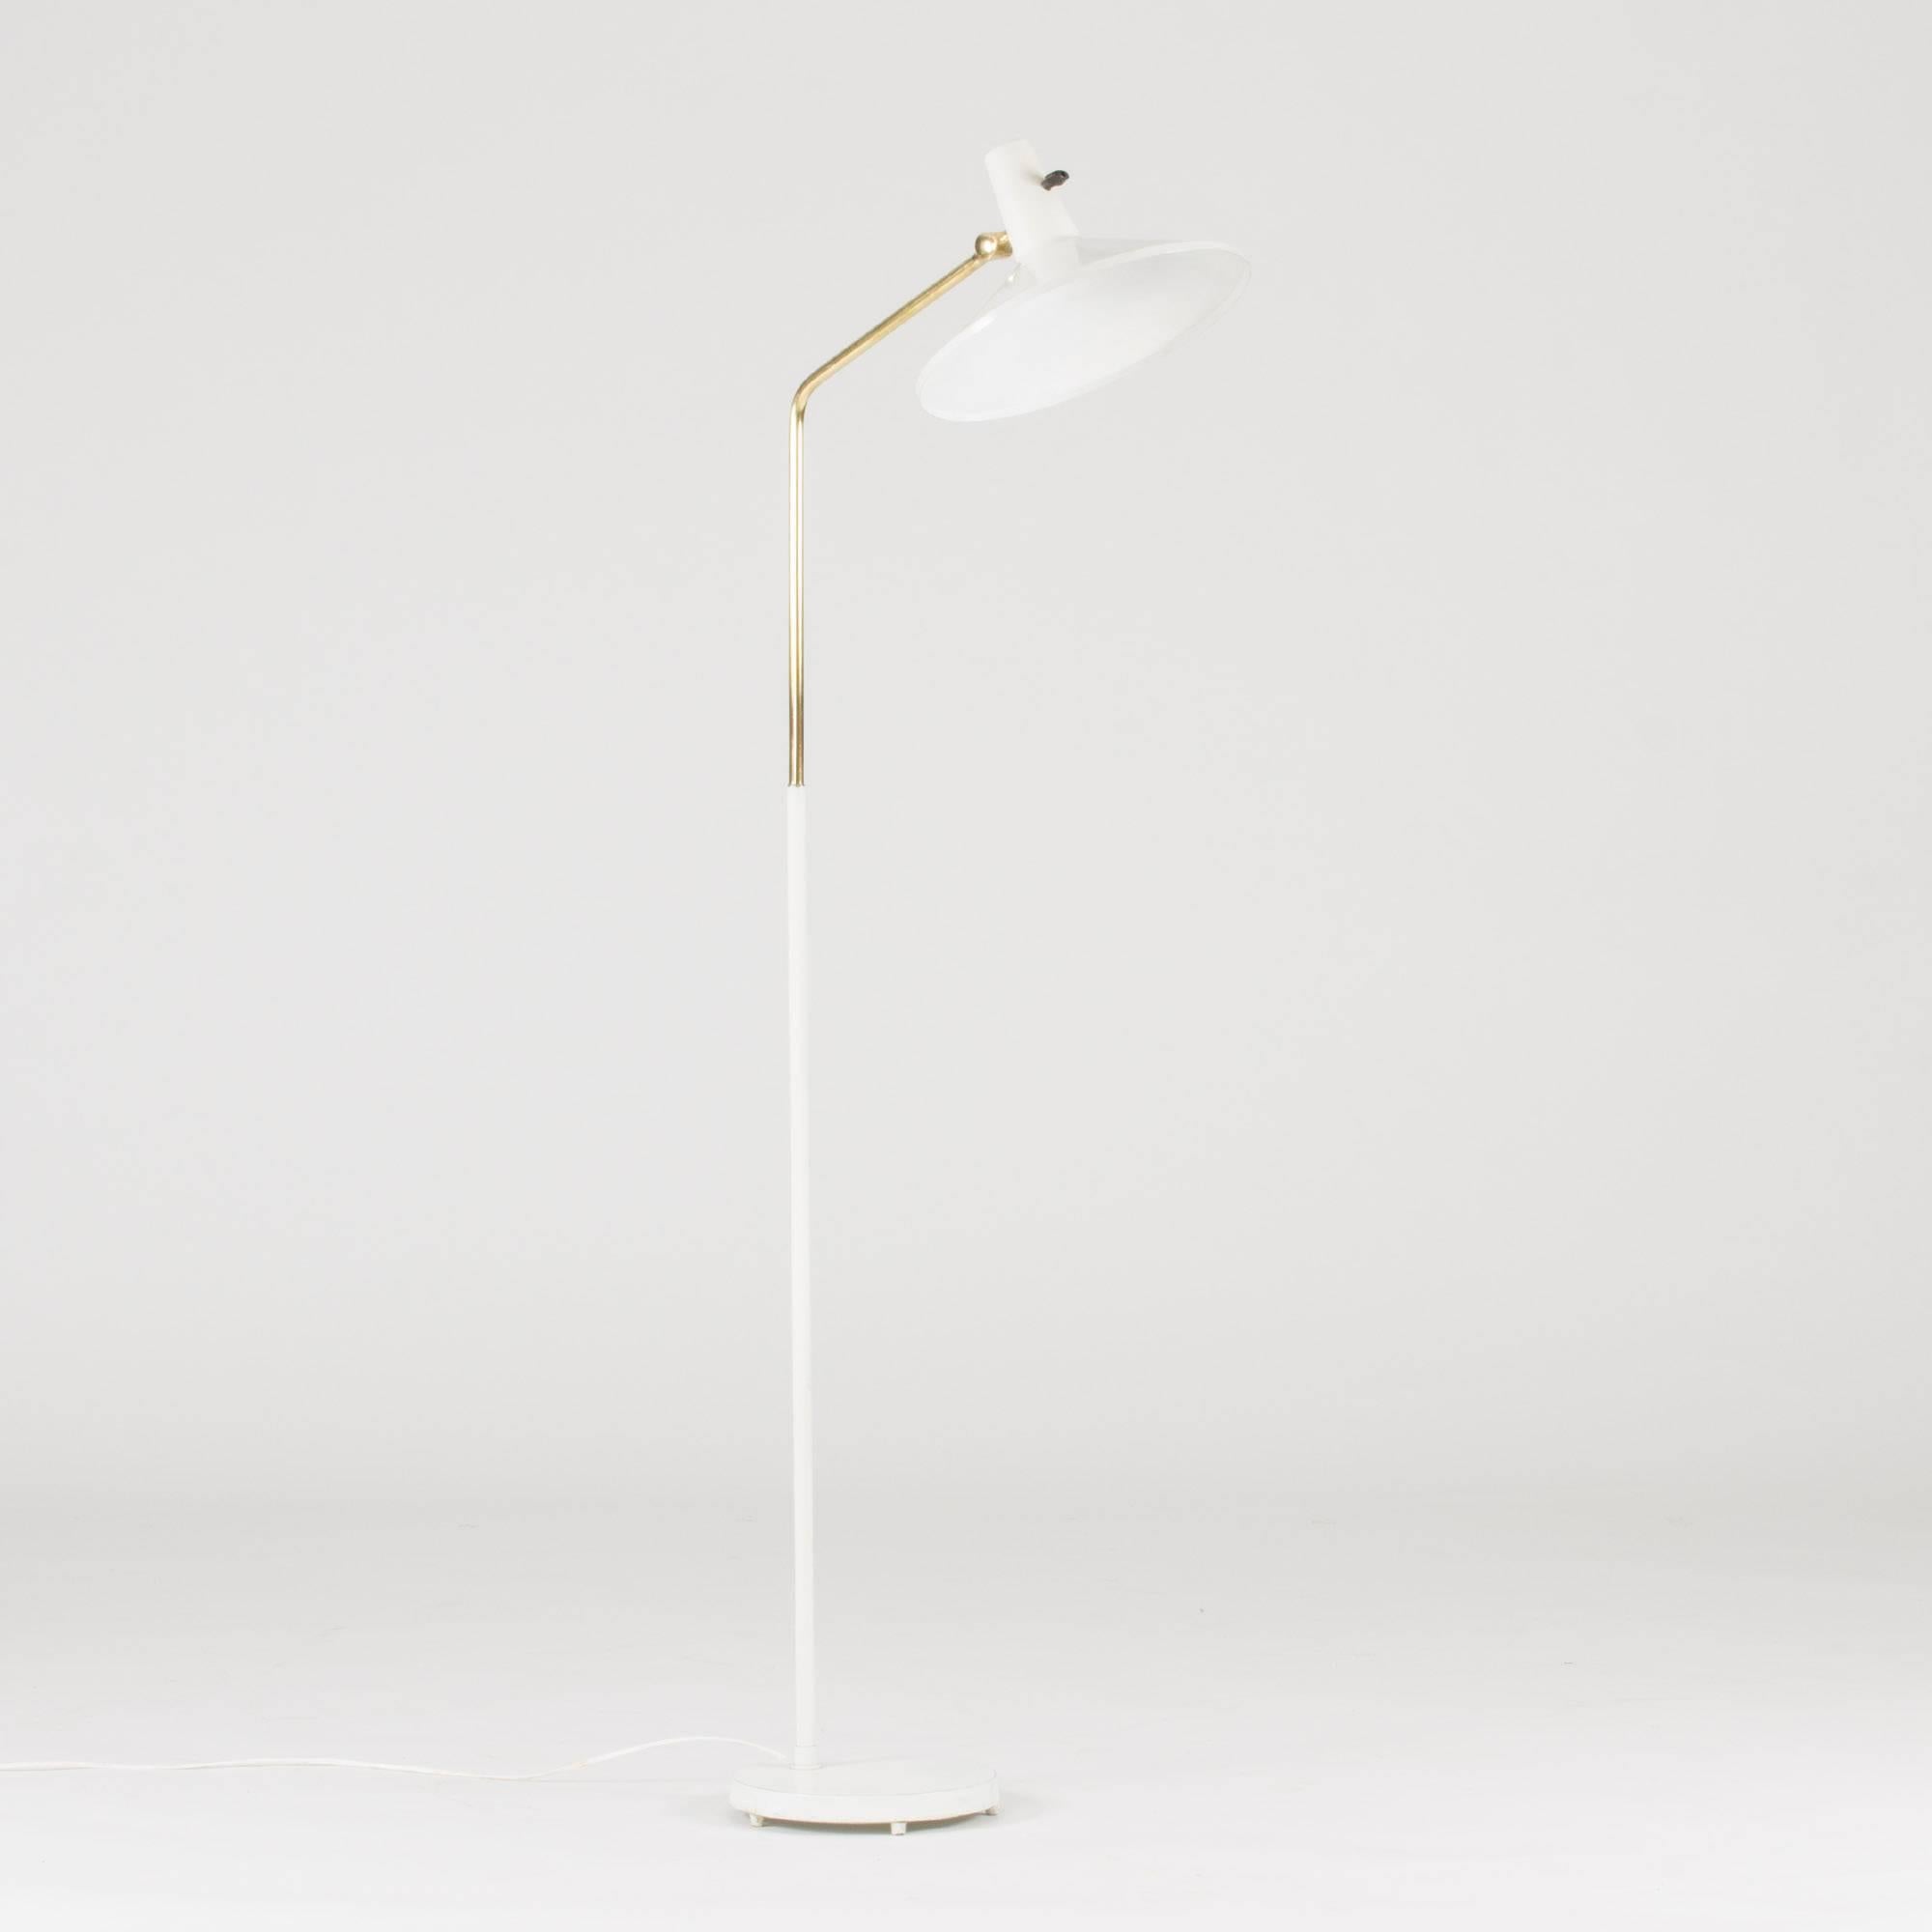 White lacquered metal and brass floor lamp with an edgy Silhouette by Bertil Brisborg, designed for the lighting department at NK department store.